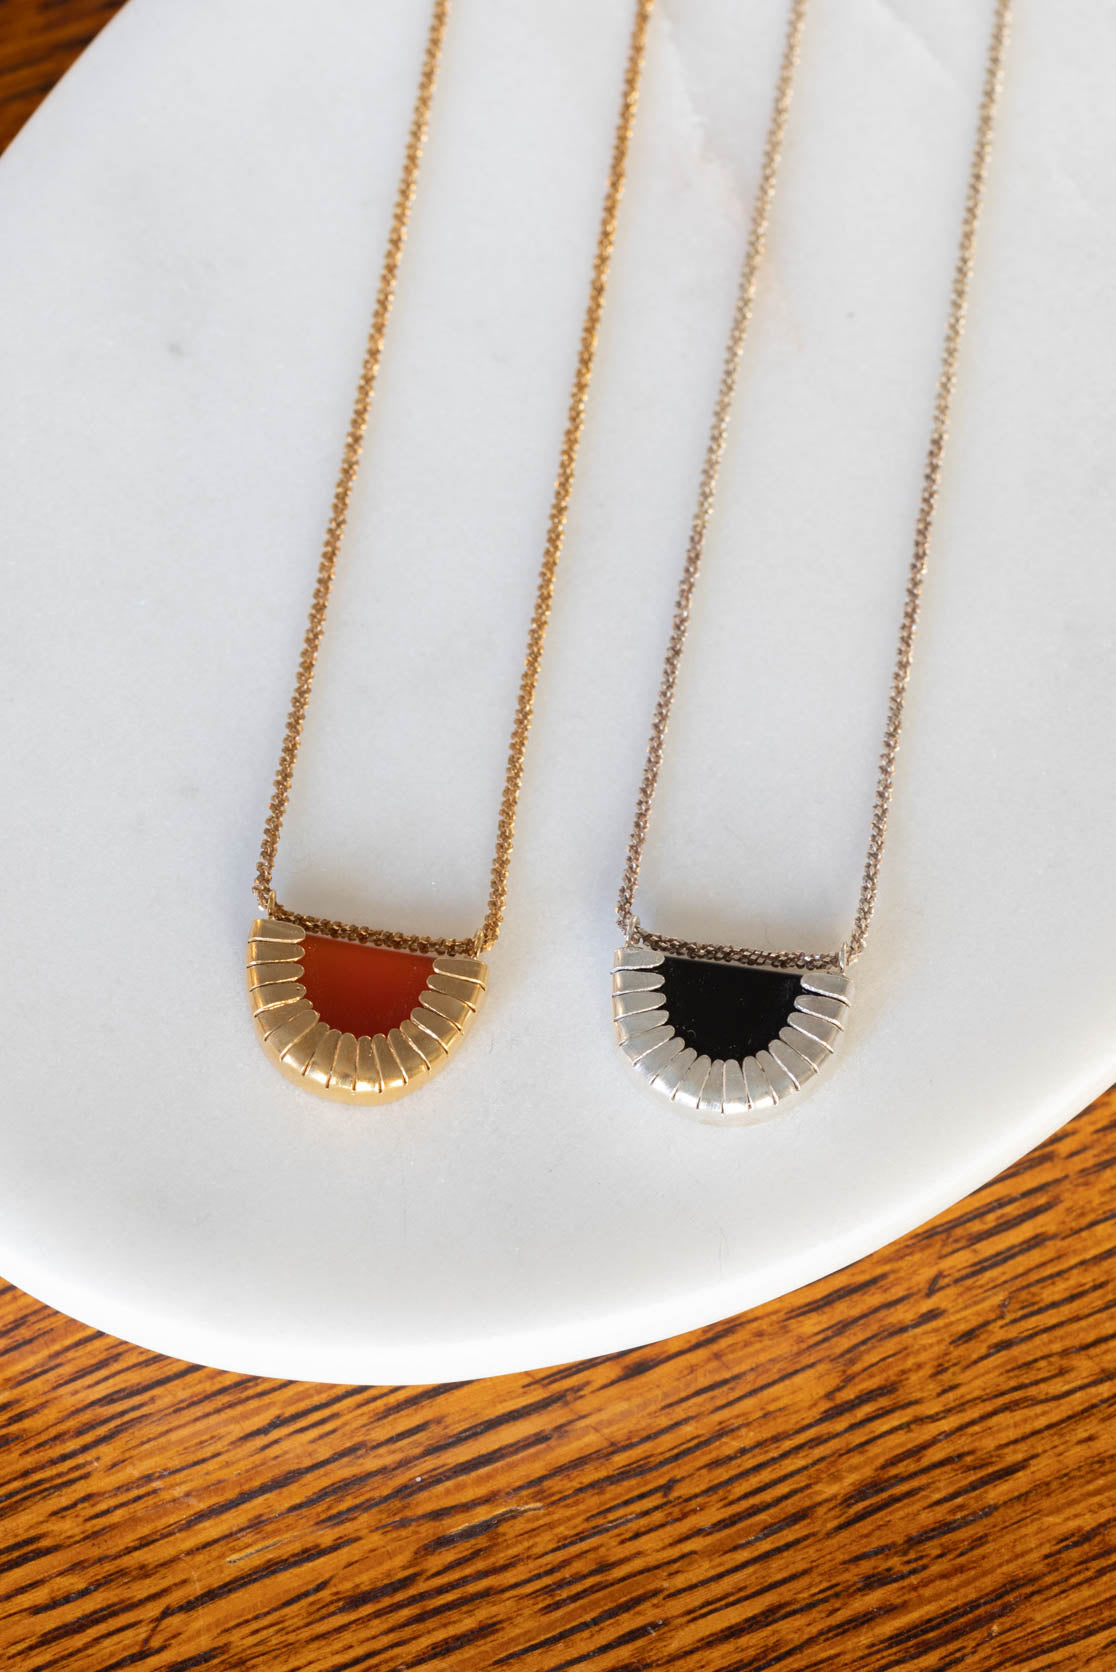 Gold and silver necklaces with black and orange detialing